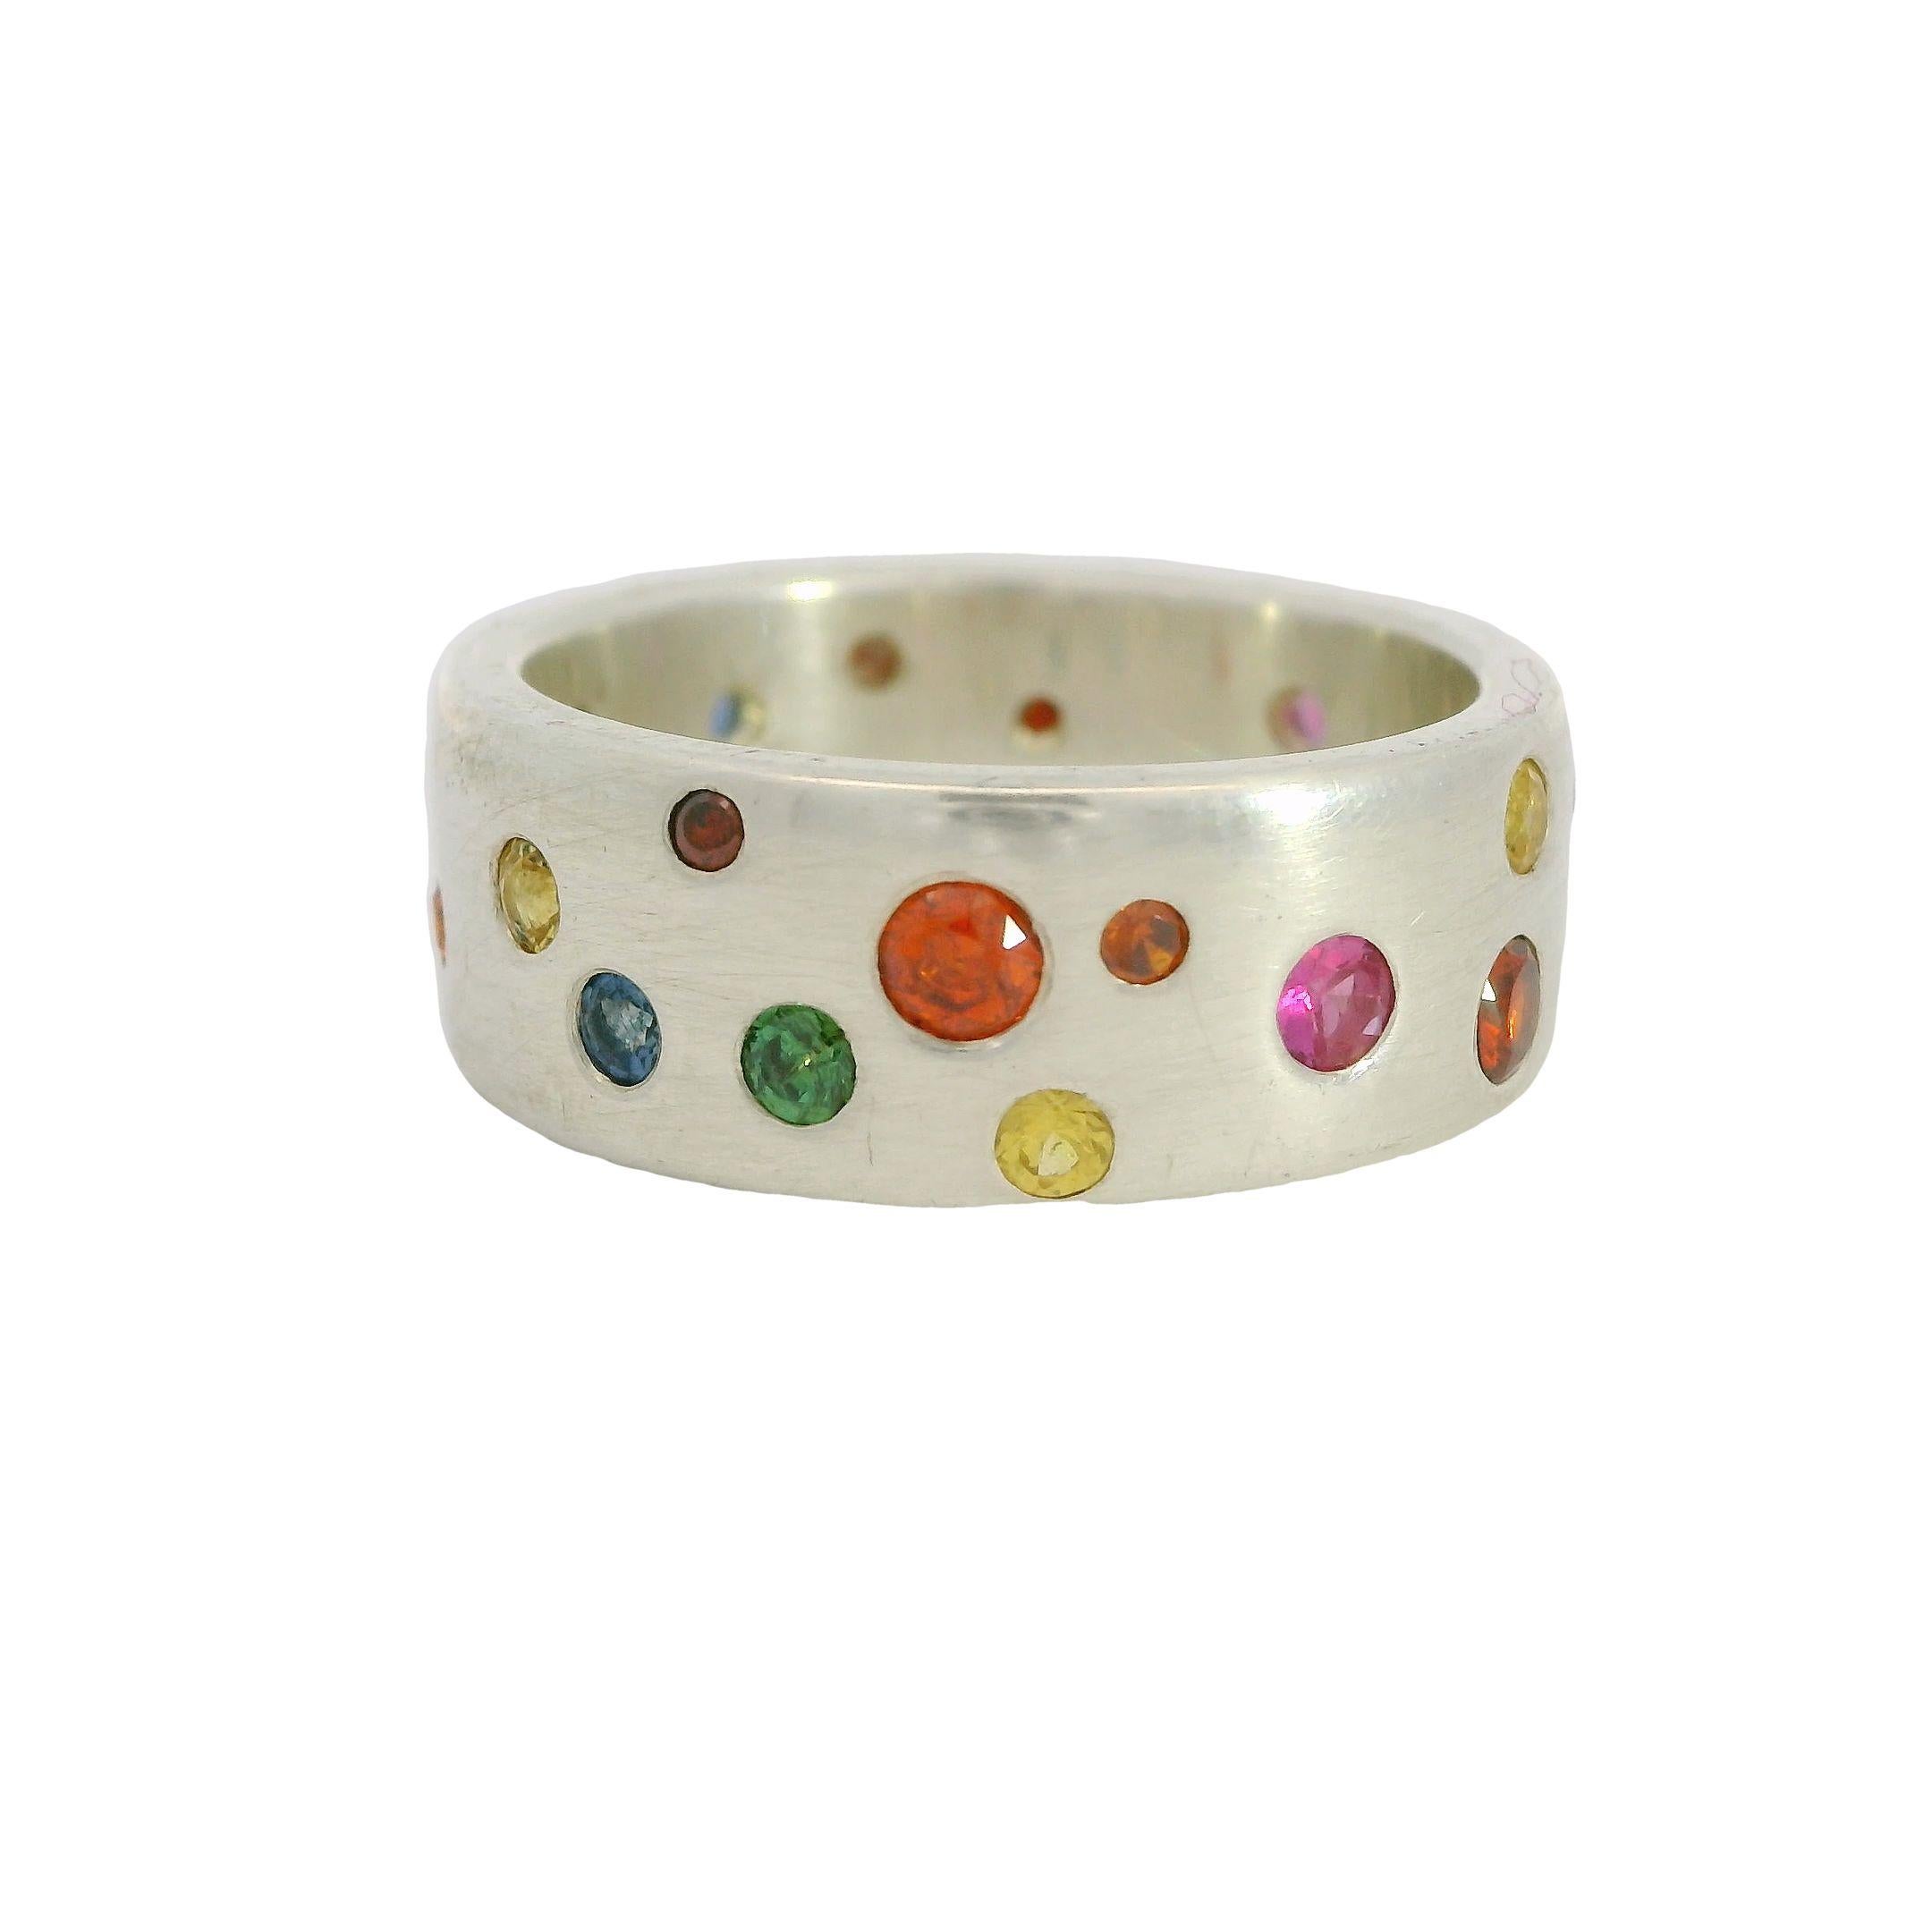 This whimsical multi-stone confetti ring is the colorful take on a cigar-like band. A very fancy, colorful party on your finger!

Unique and handmade, this size US 7/EU 55, 7.6mm wide solid band is randomly scattered with flush set (gypsy set) multi